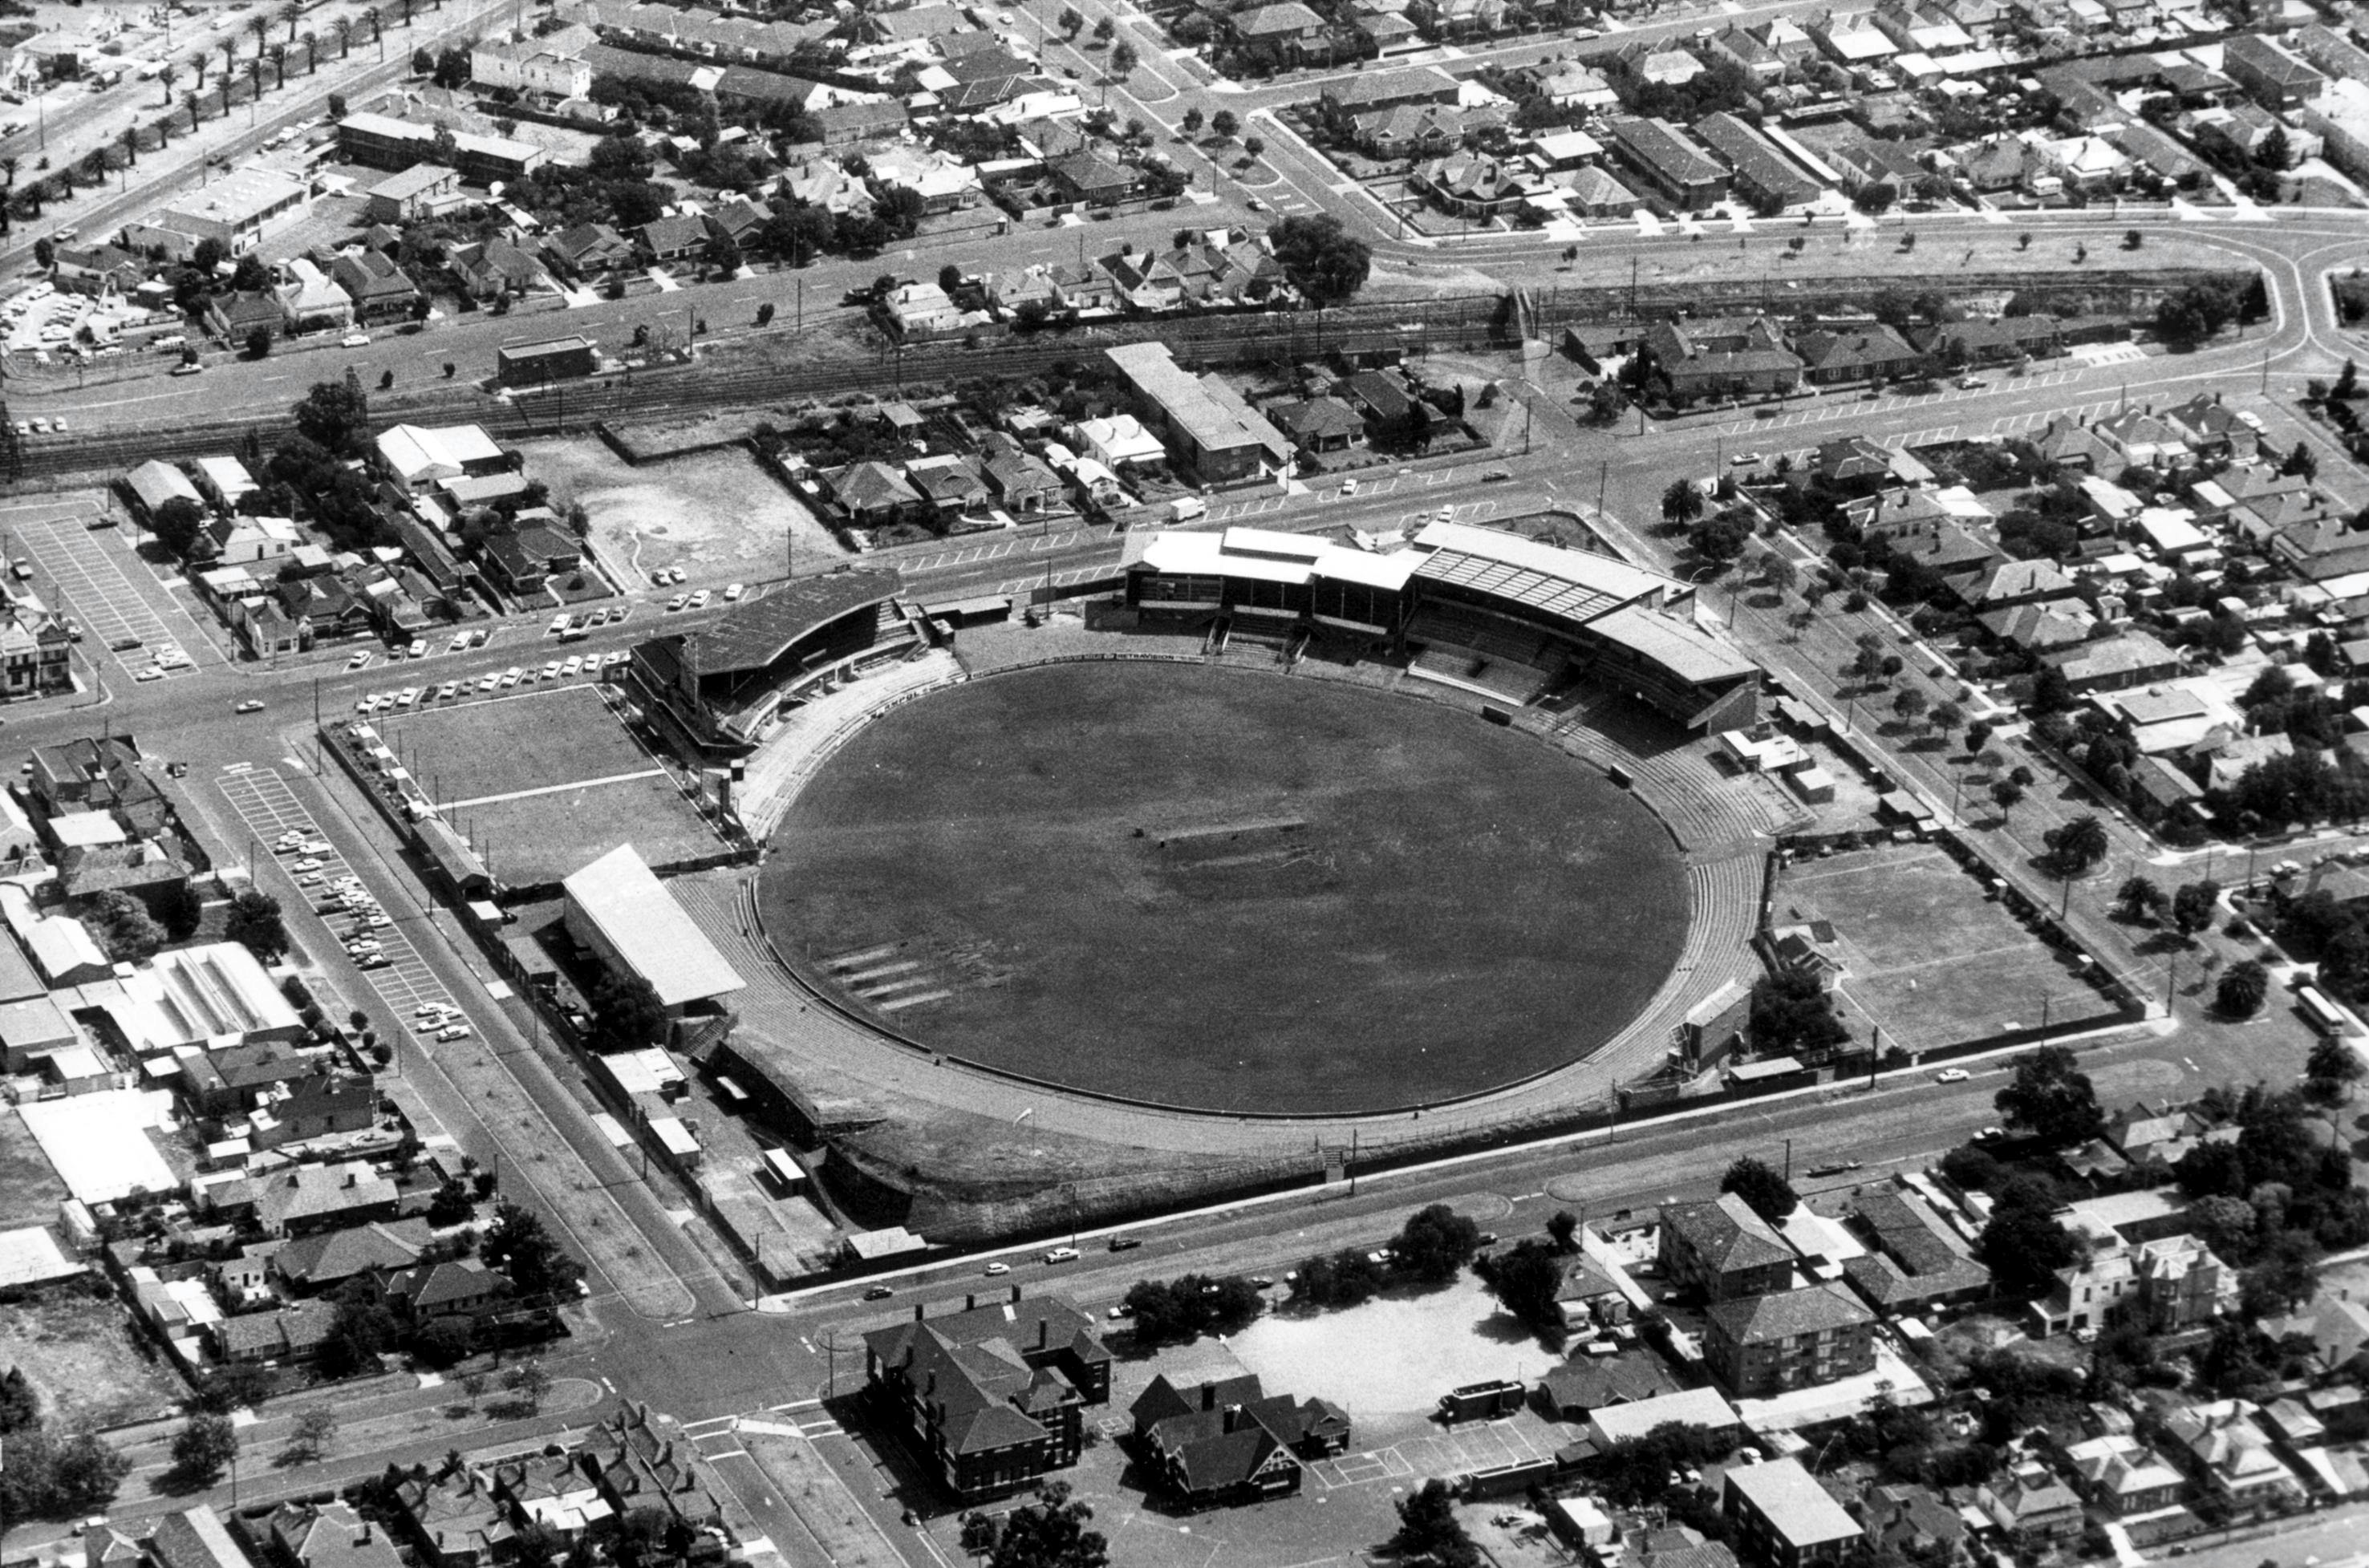 1975 aerial image of Windy Hill, courtesy of The Age archives